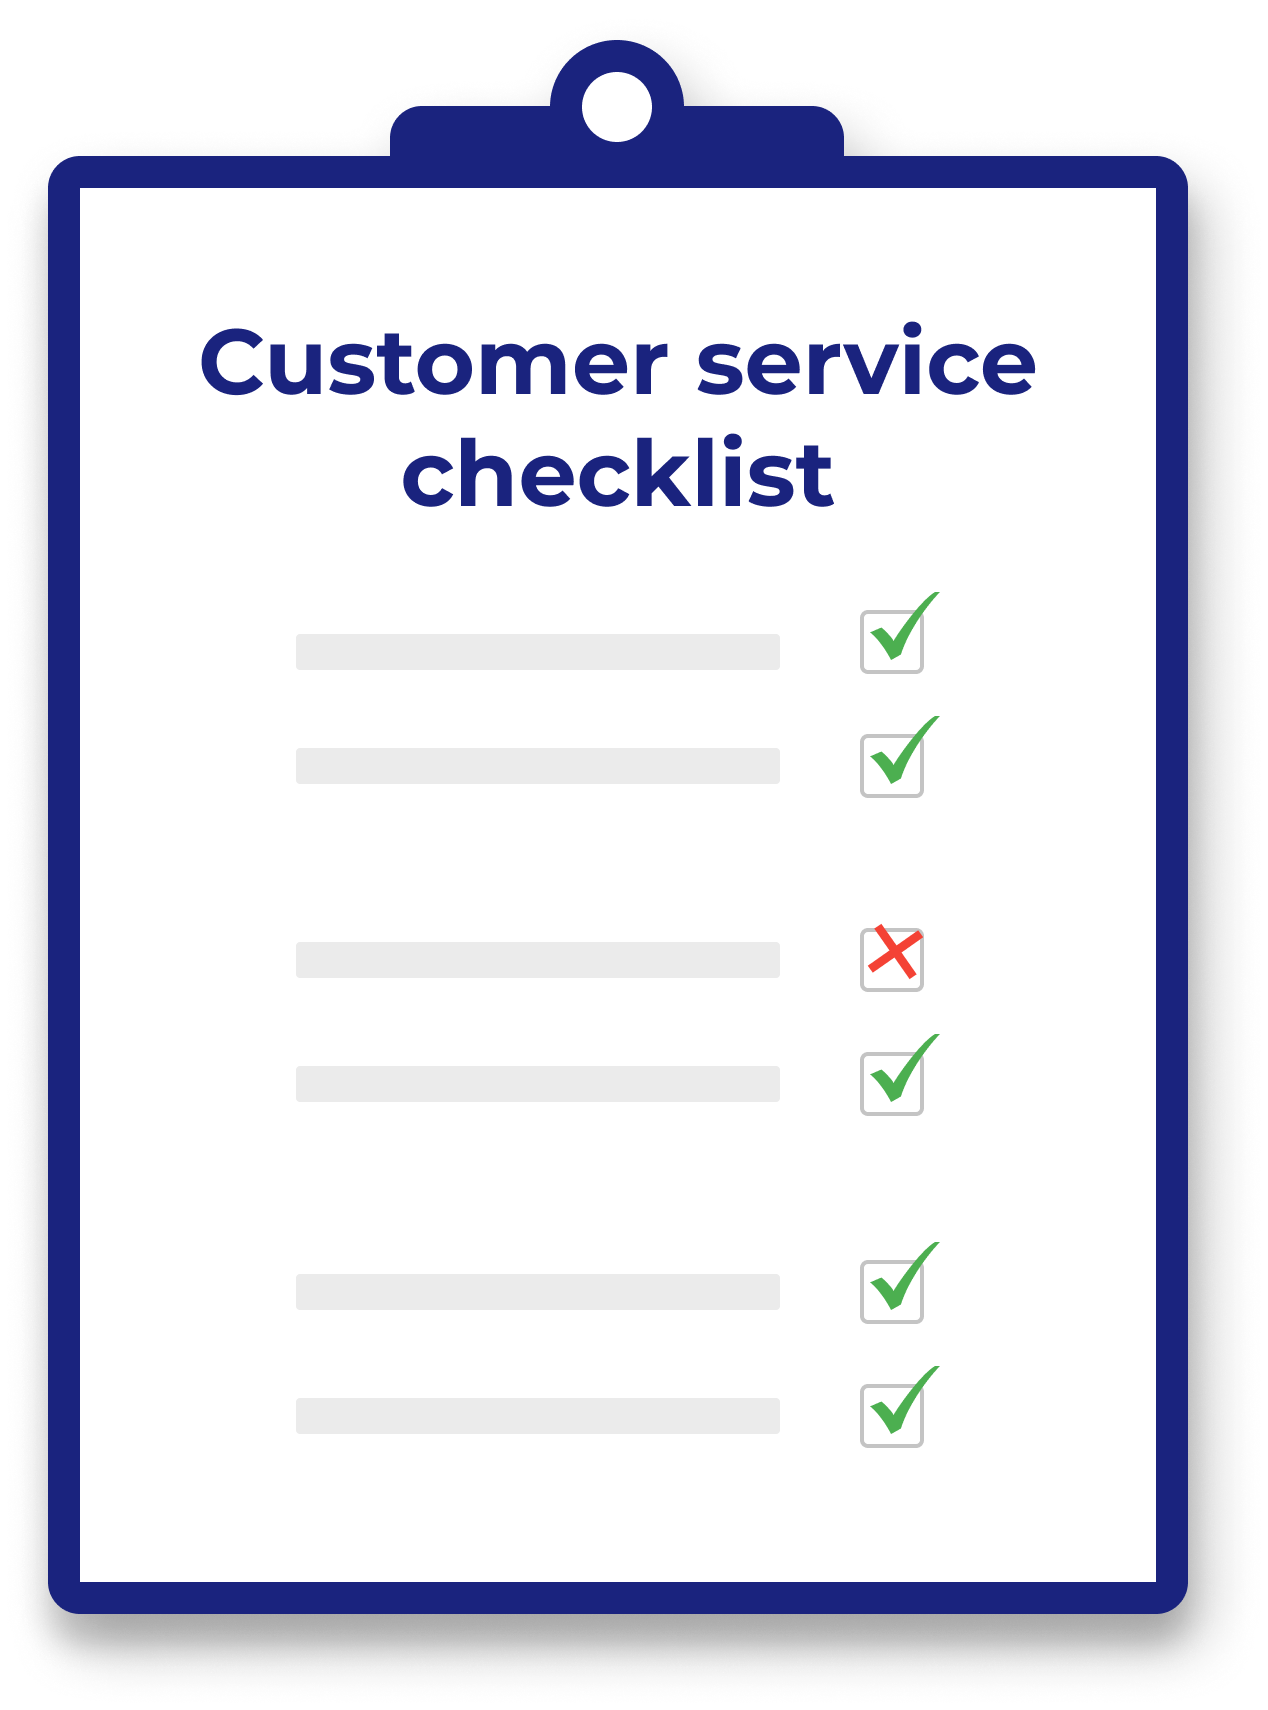 customer service checklist - Dealing With Difficult Customers in Your Bar or Restaurant